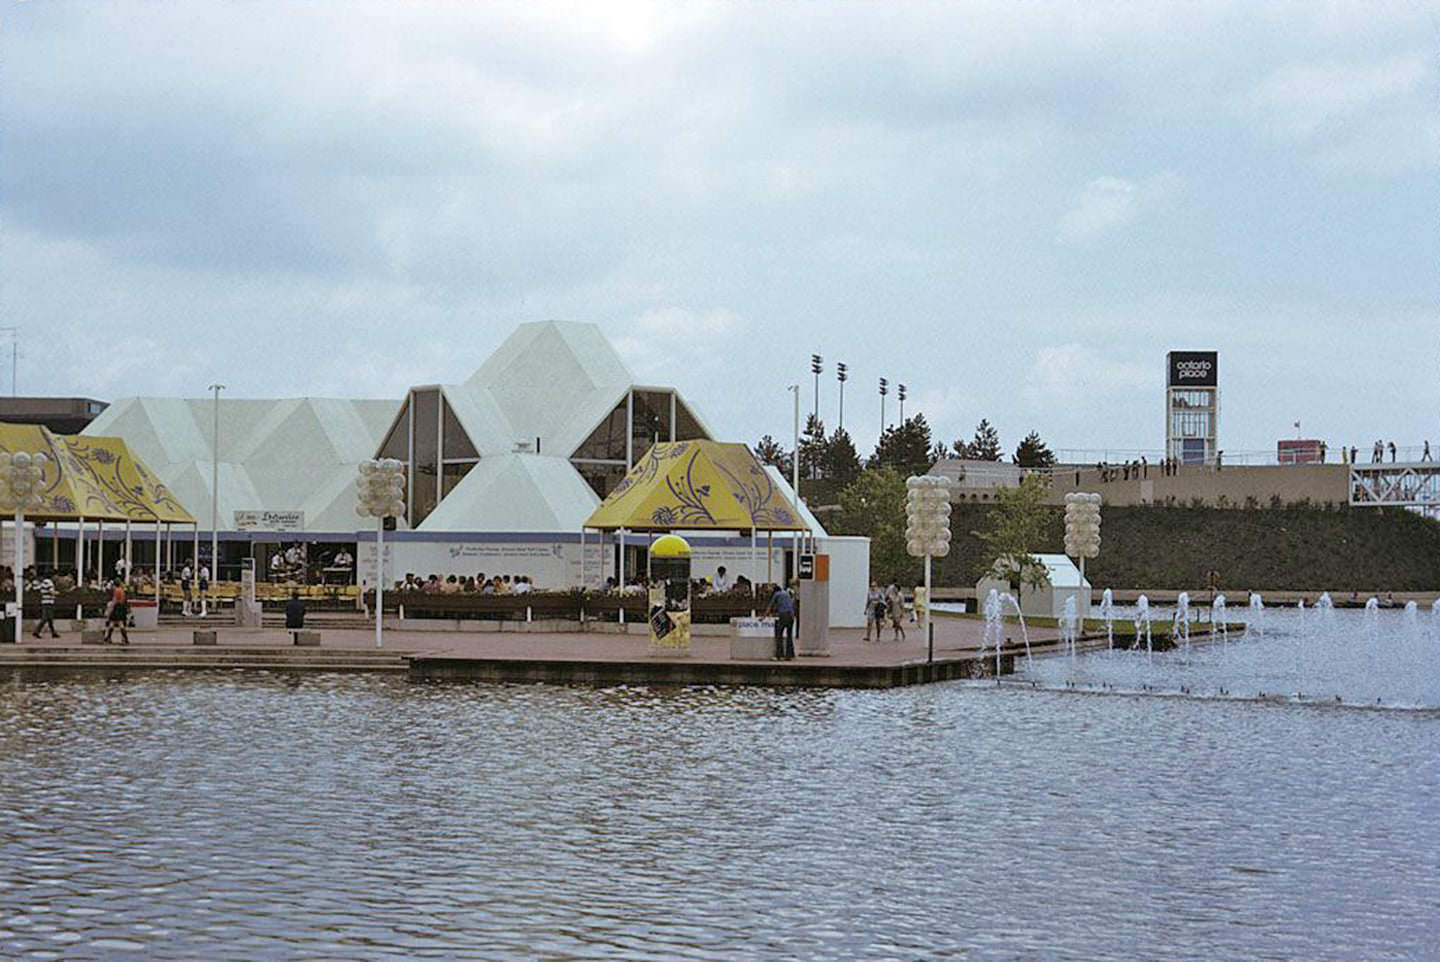 West Island, Ontario Place. Photo by Ellis Wiley, August 1972.